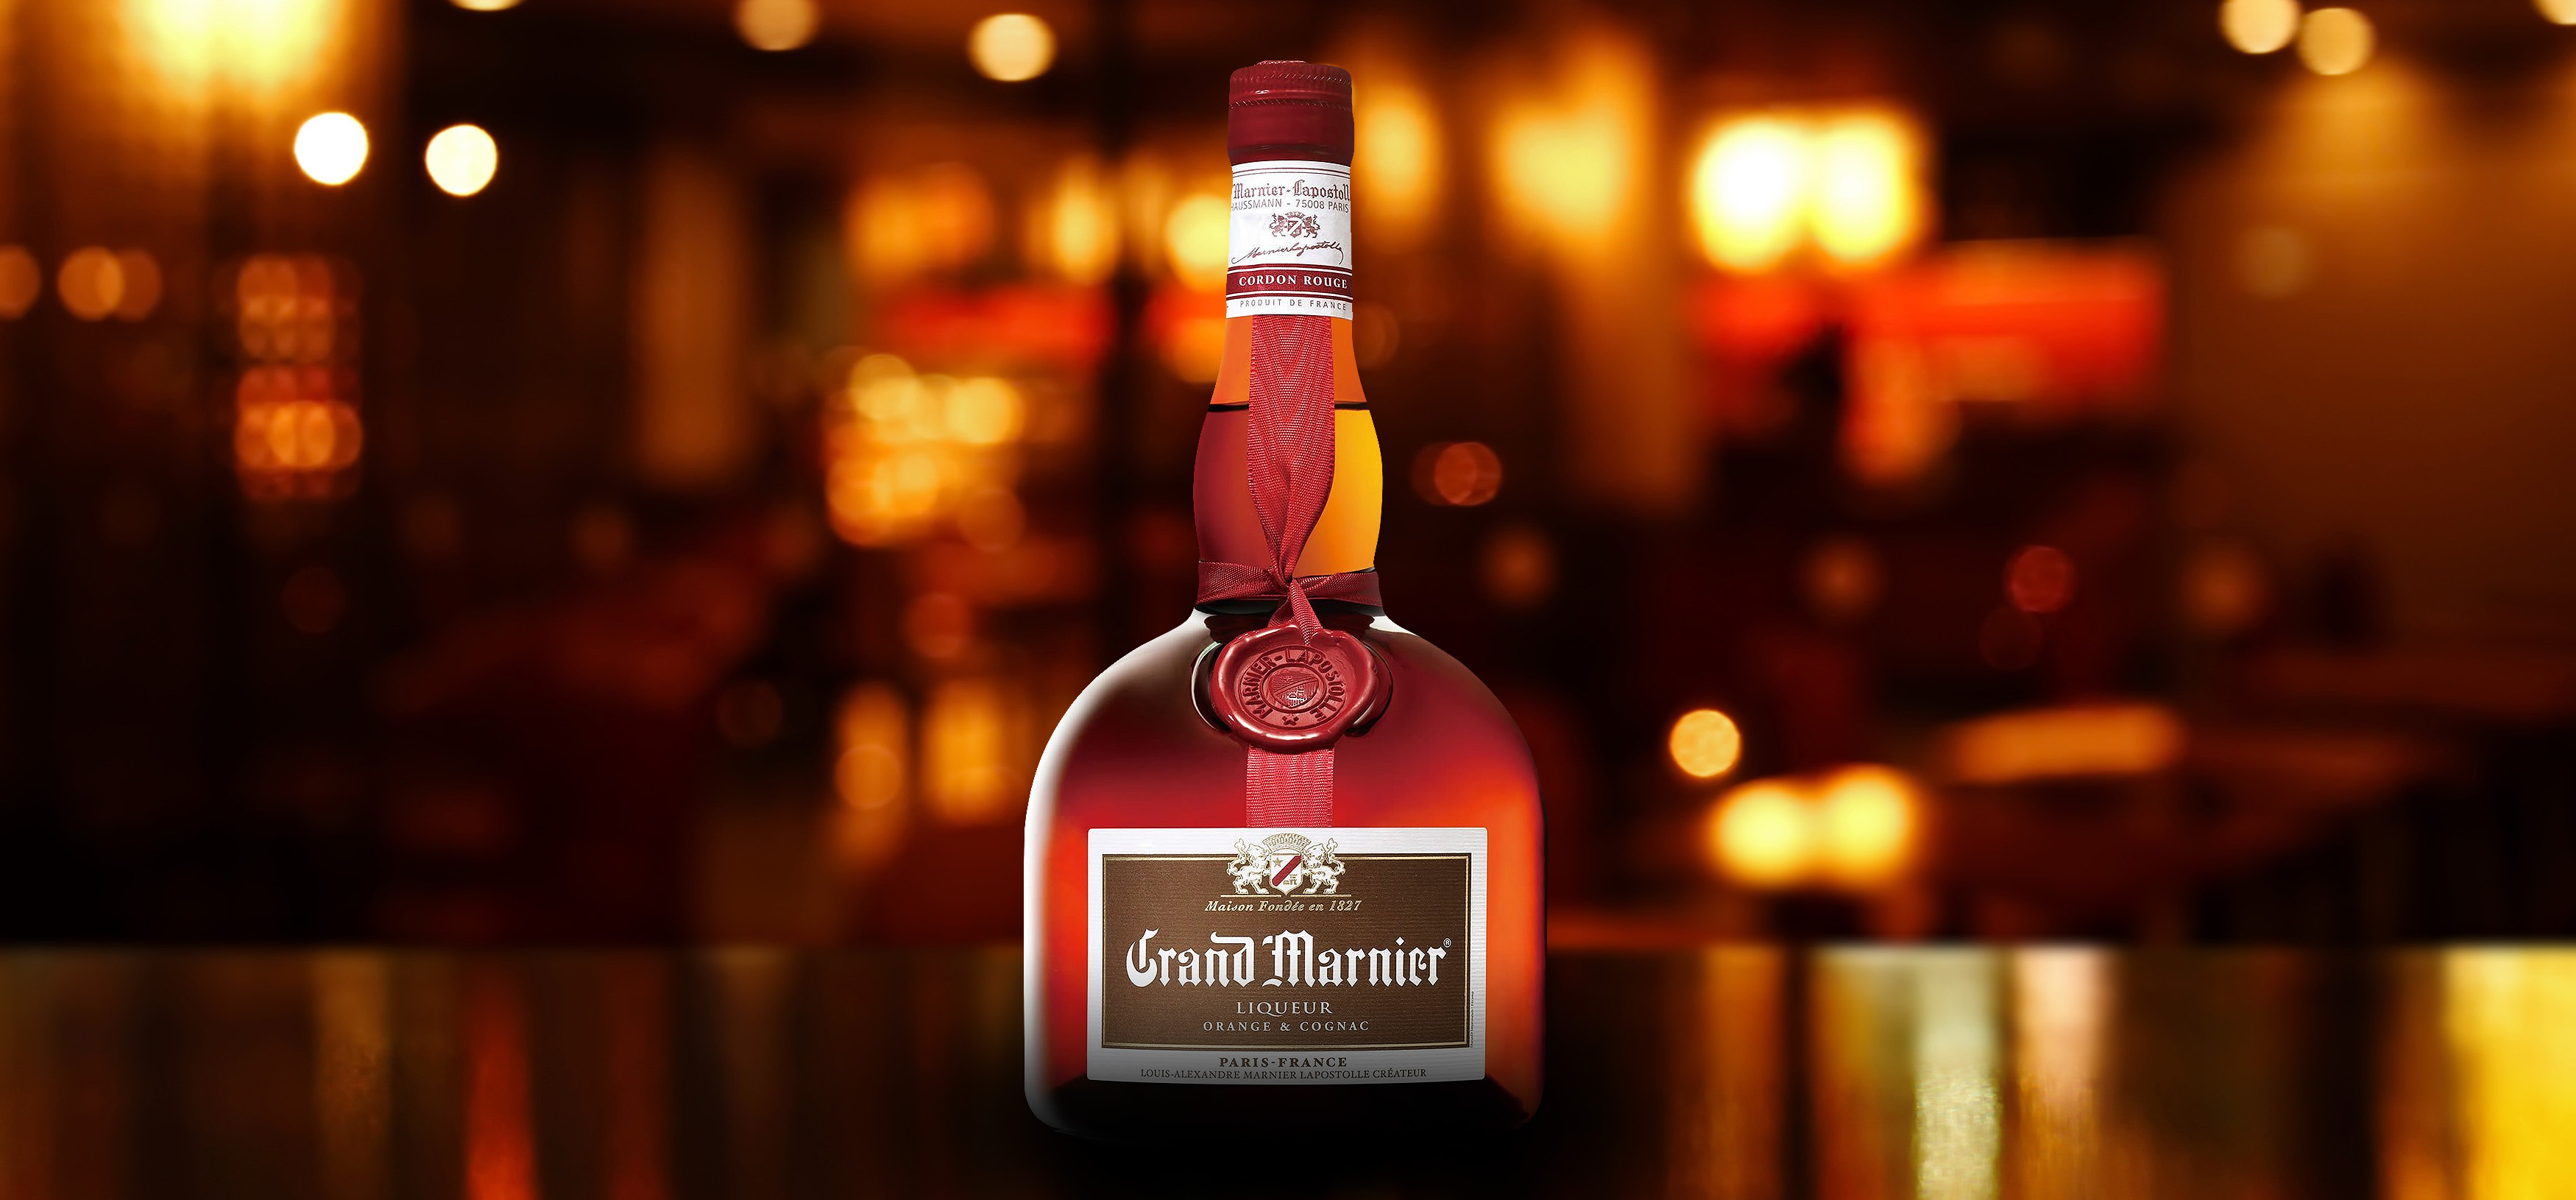 Grand Marnier  Local Orange Liqueur From France, Western Europe